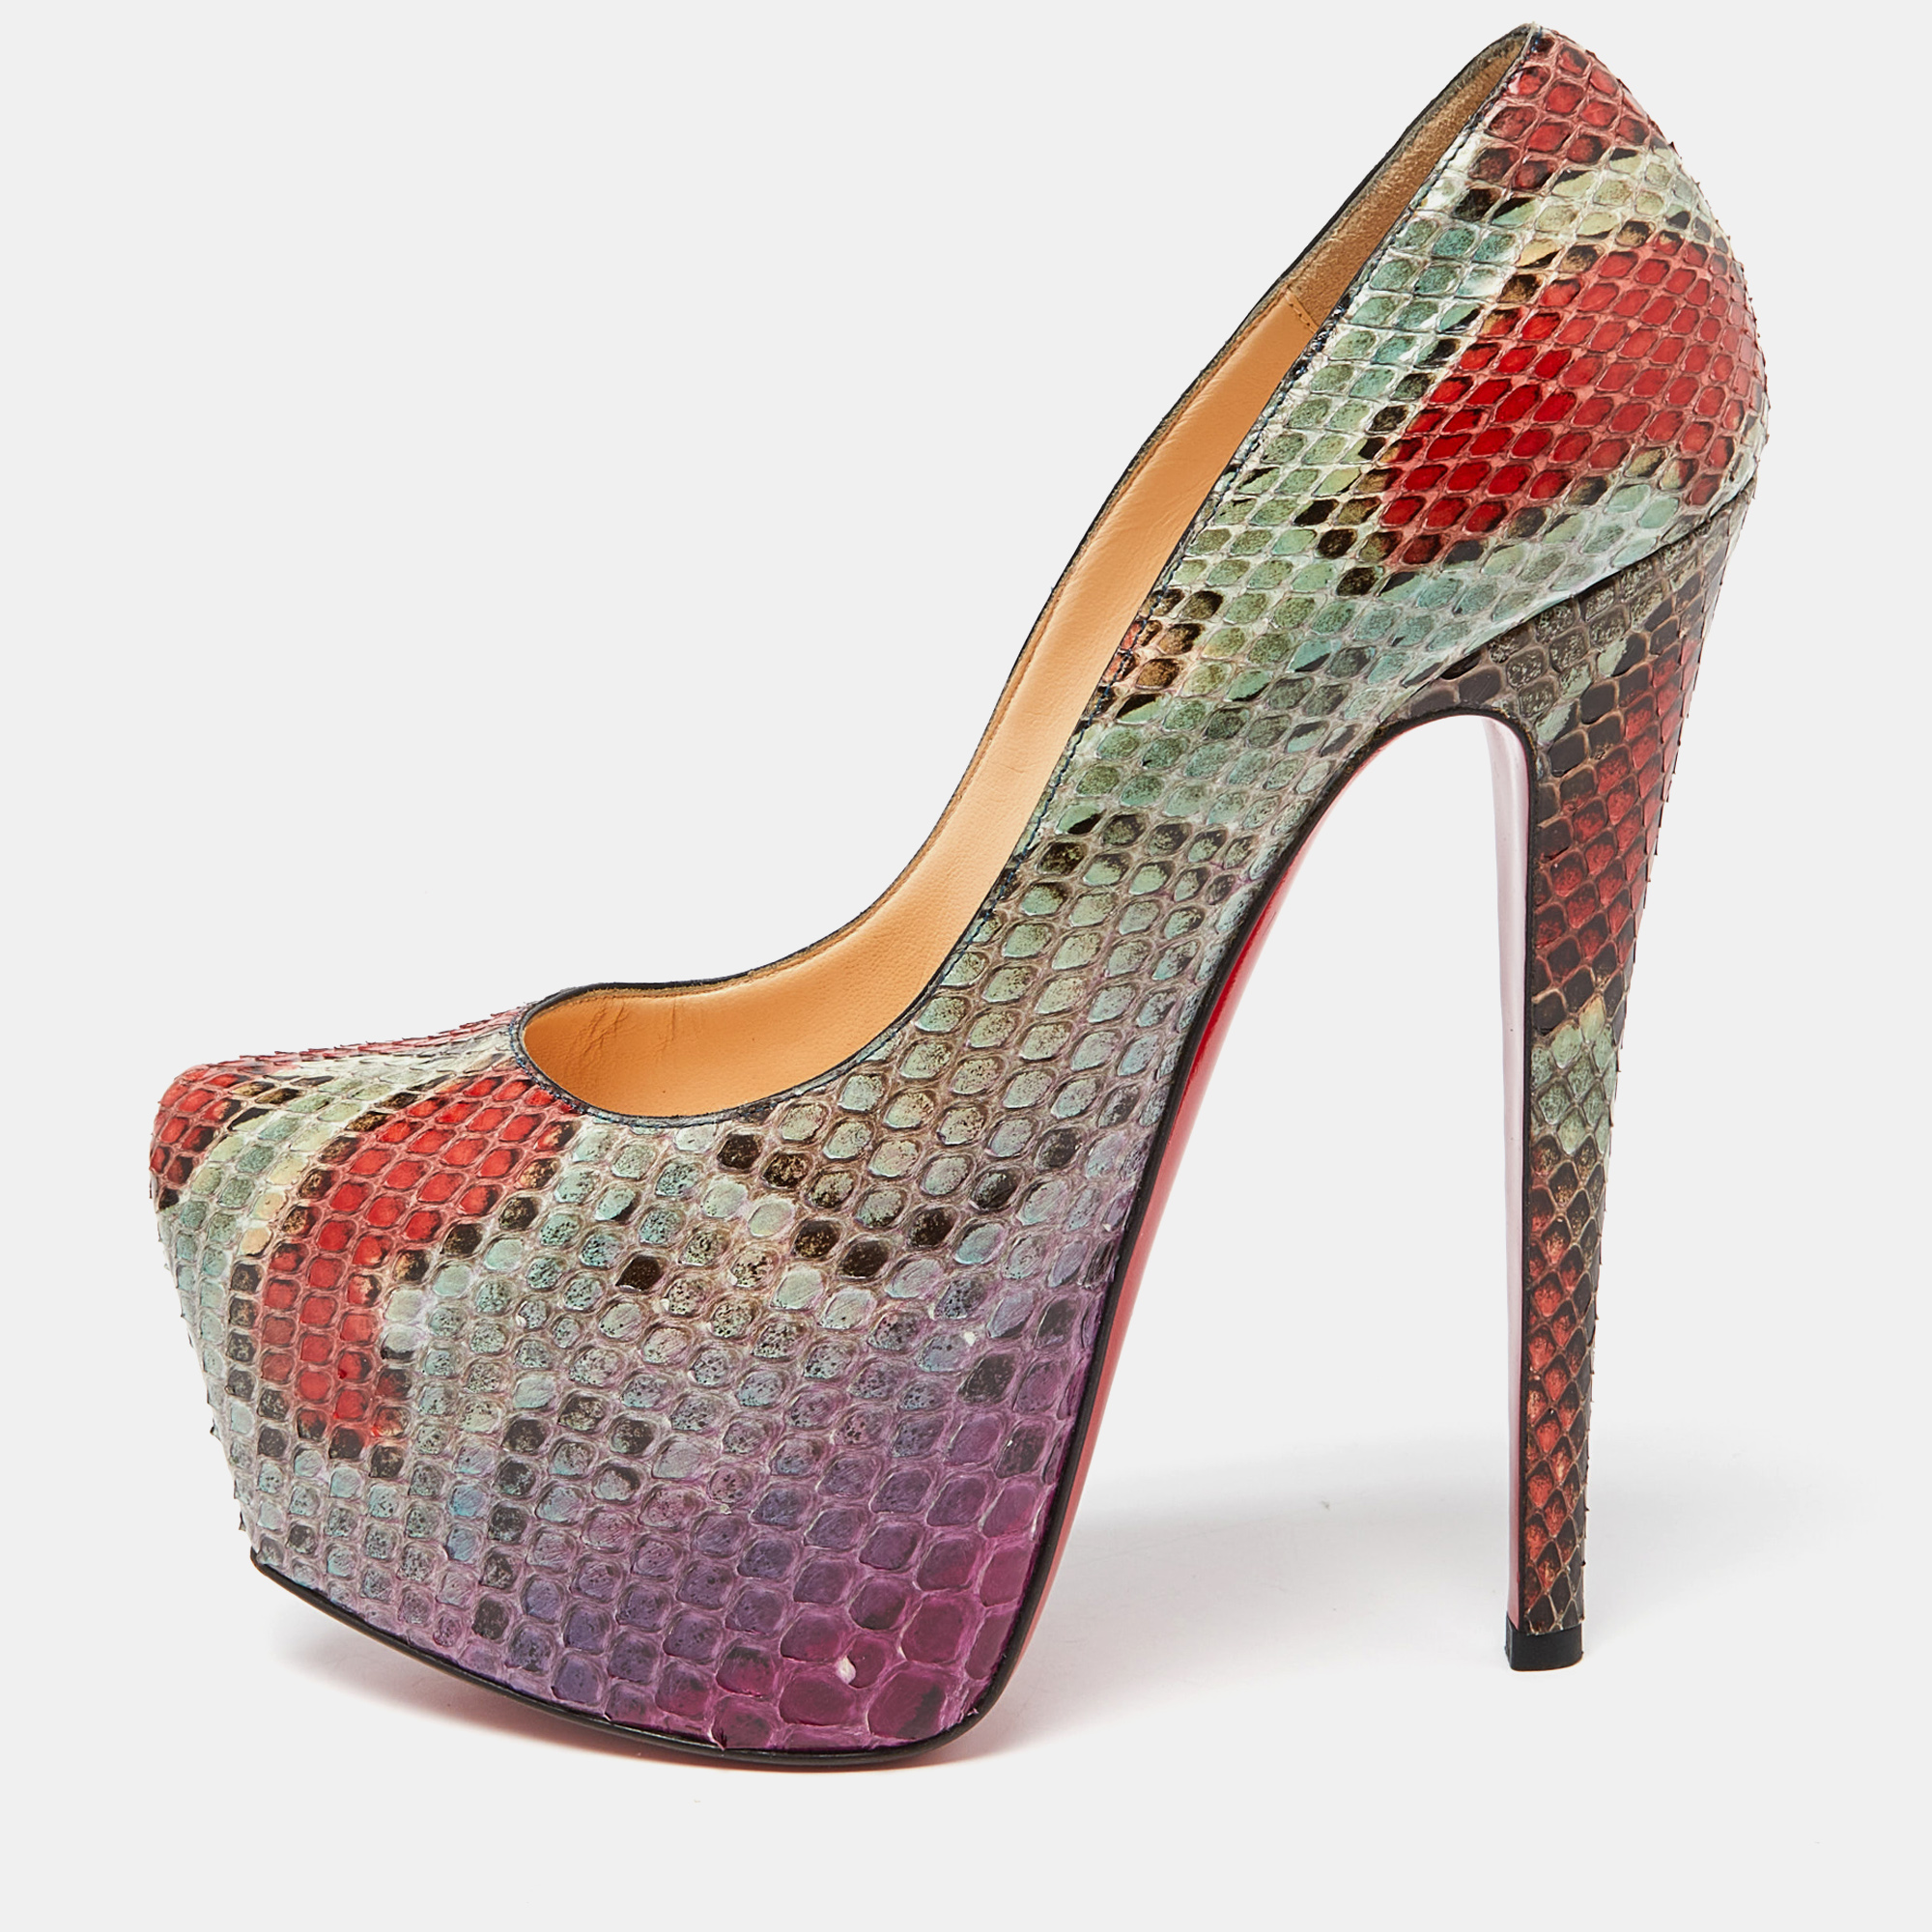 Pre-owned Christian Louboutin Multicolor Python Daffodile Pumps Size 37